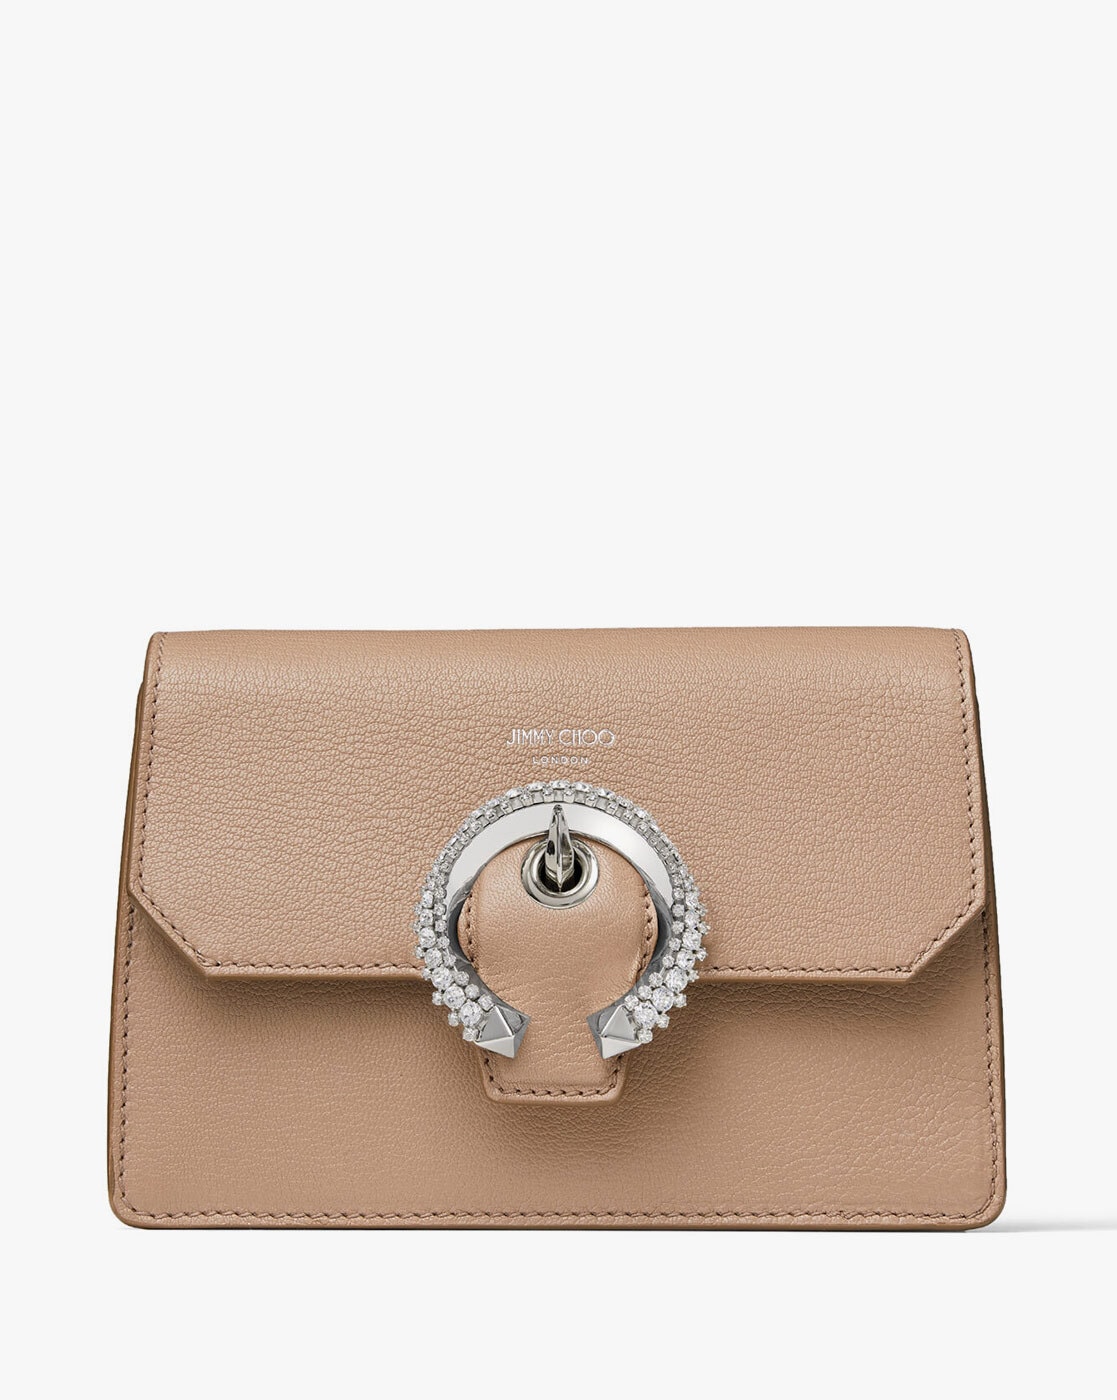 CARD HOLDER W/CHAIN | Black Leather Card Holder with Chain | Summer  Collection | JIMMY CHOO